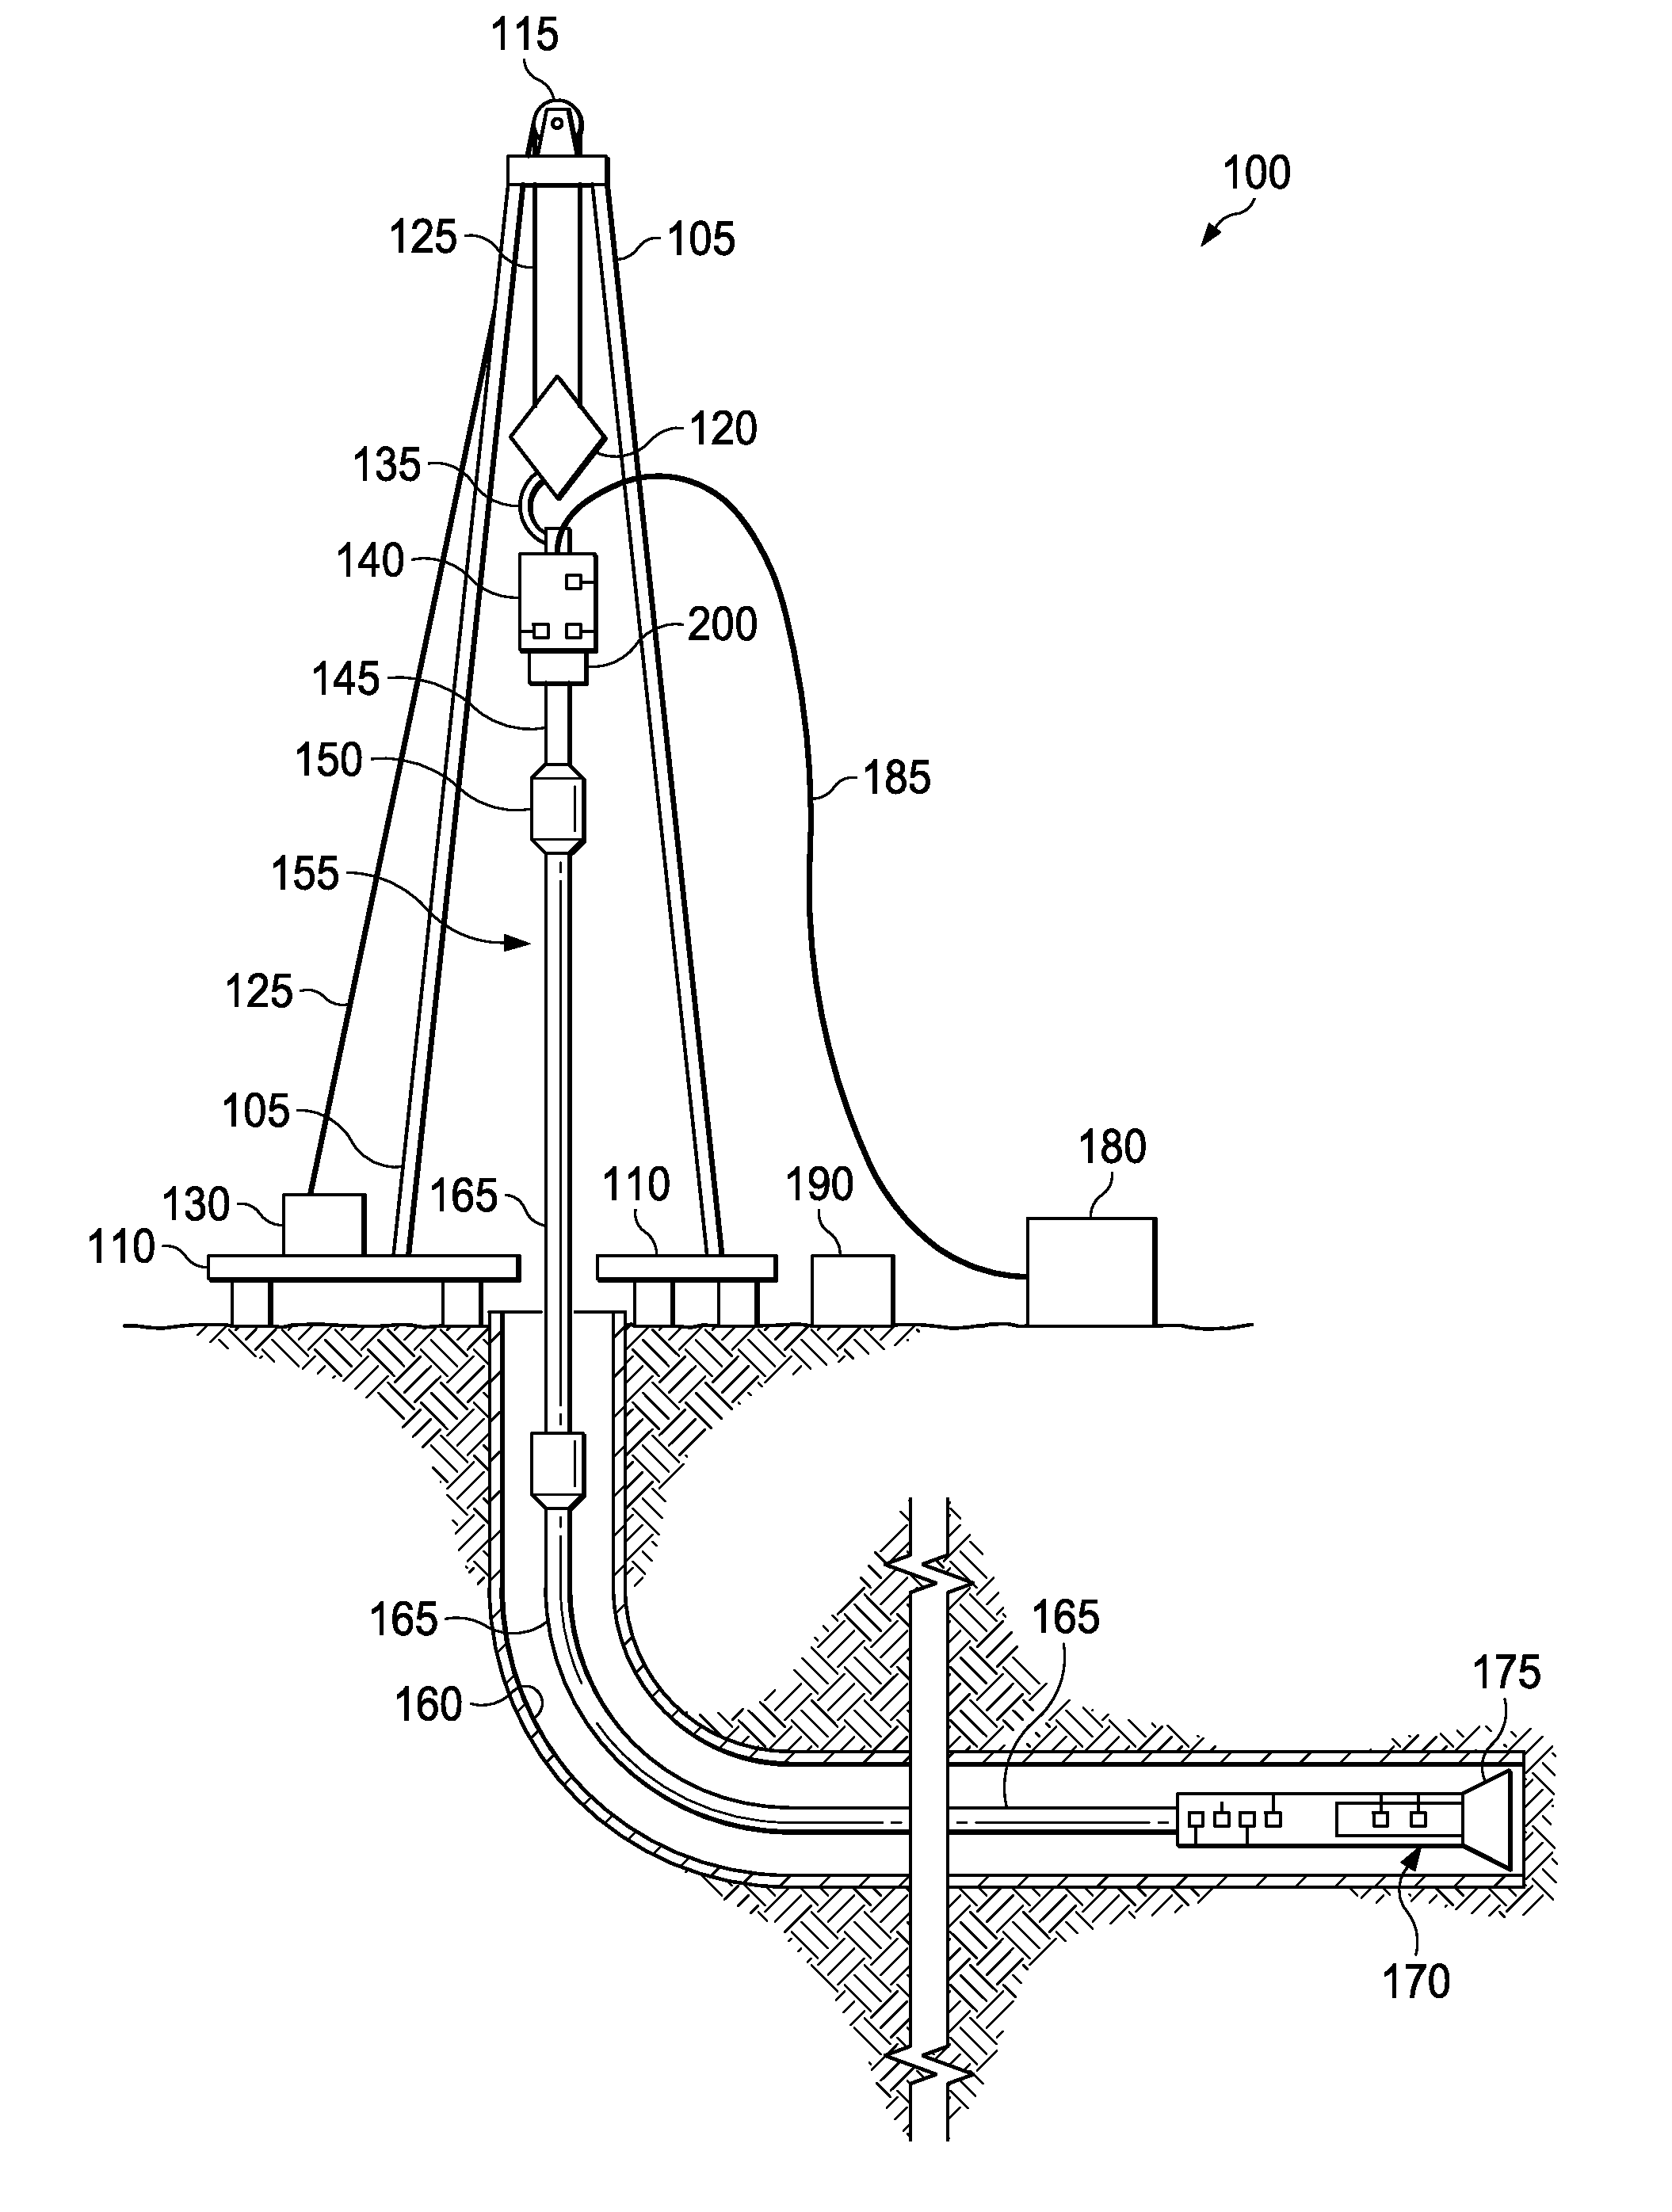 Drill string with aluminum drill pipes, bent housing, and motor